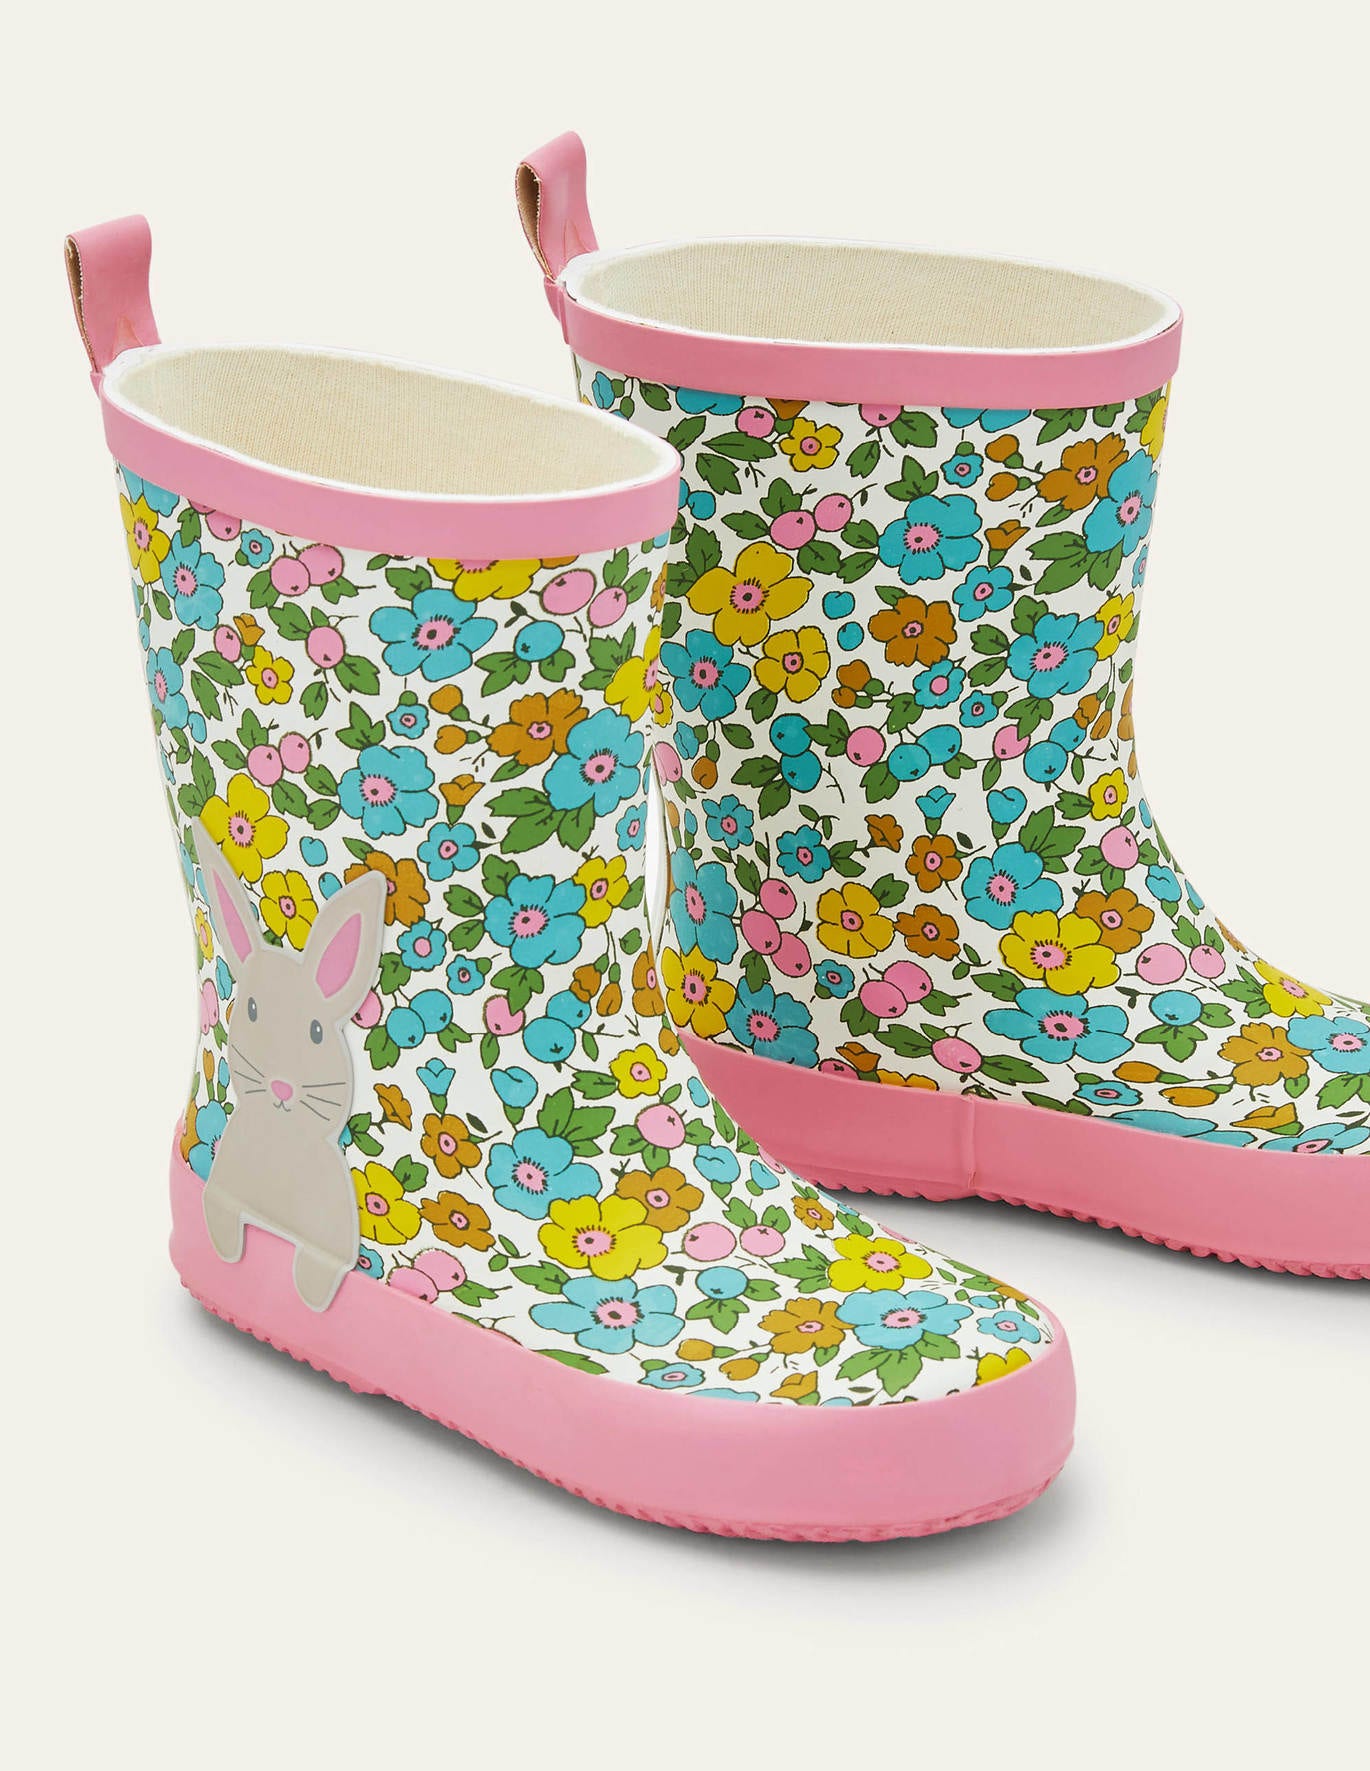 Boden Fun Wellies - Floral Bunny